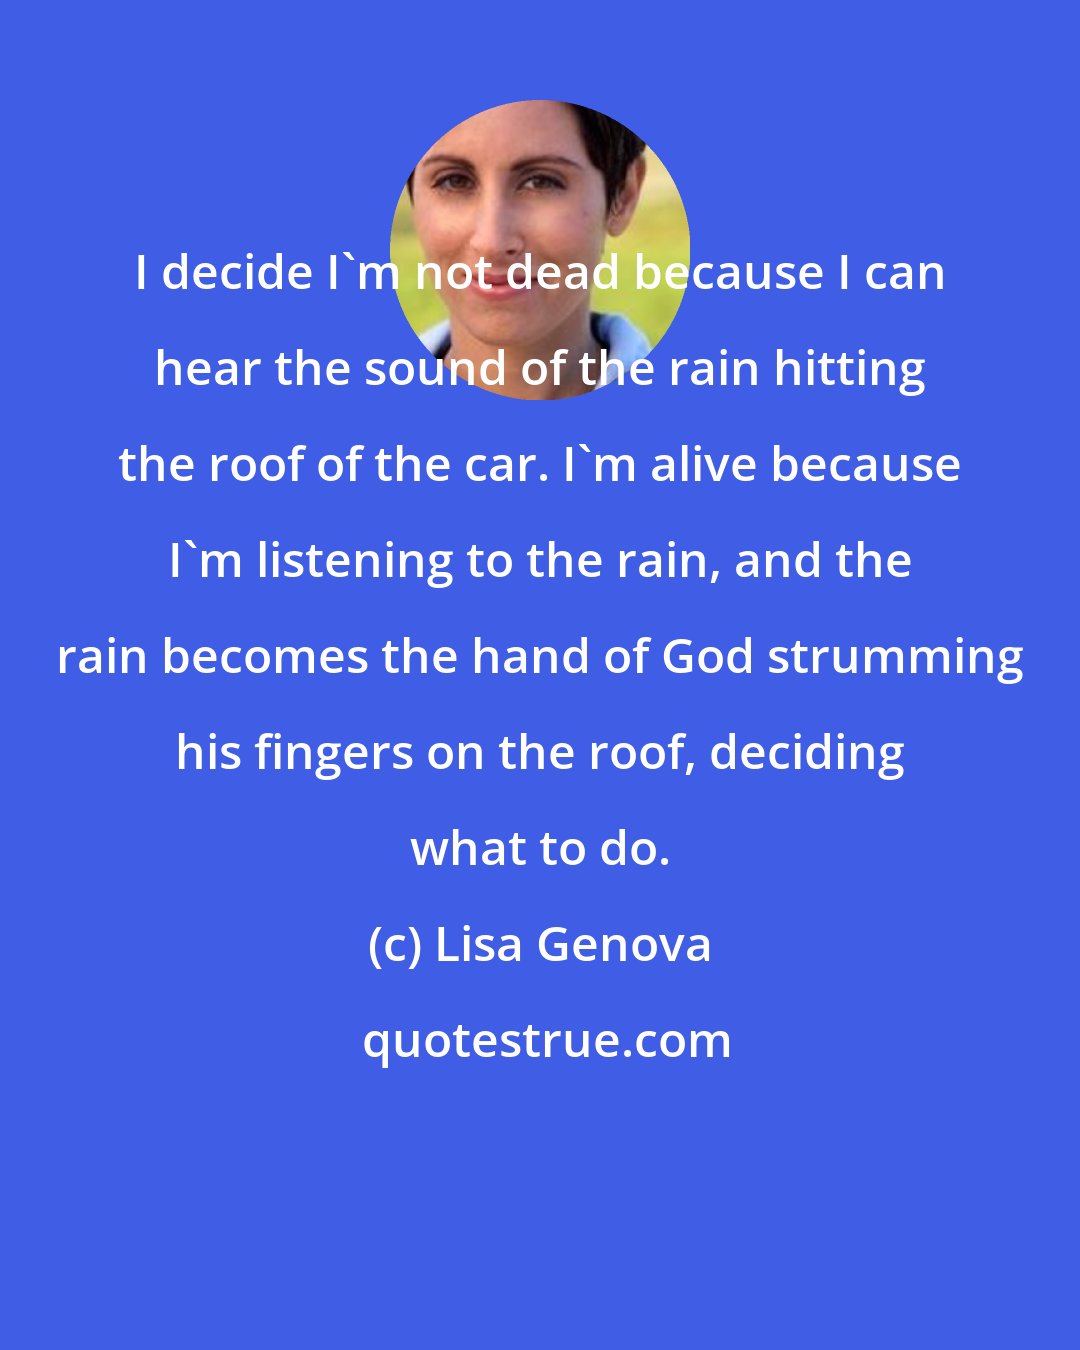 Lisa Genova: I decide I'm not dead because I can hear the sound of the rain hitting the roof of the car. I'm alive because I'm listening to the rain, and the rain becomes the hand of God strumming his fingers on the roof, deciding what to do.